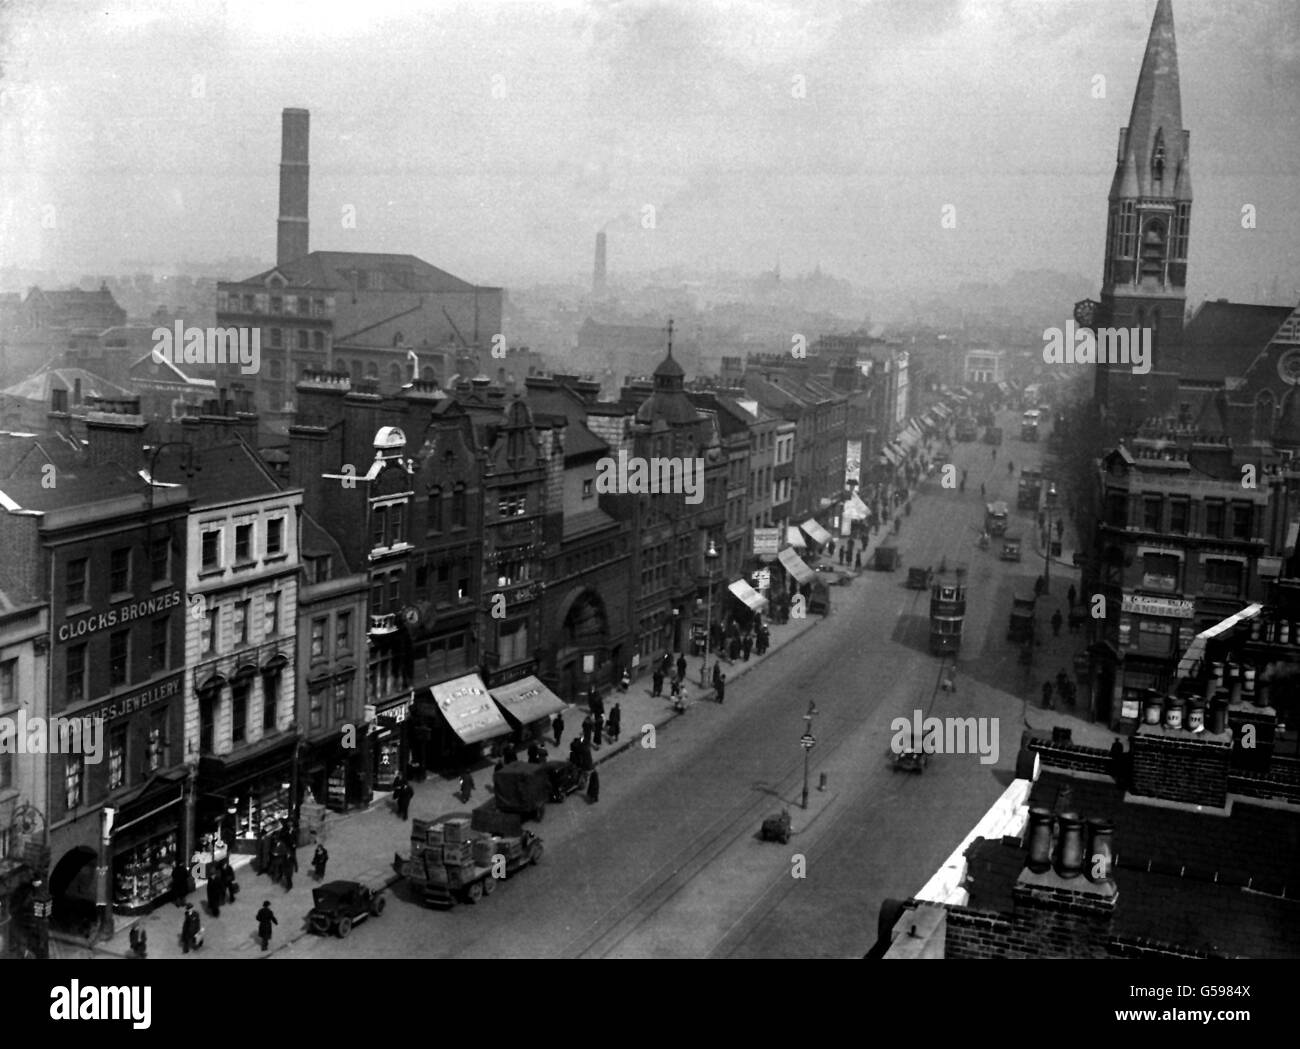 WHITECHAPEL, LONDON 1932: A view of Bow Church, Whitechapel, as seen from Aldgate. Stock Photo